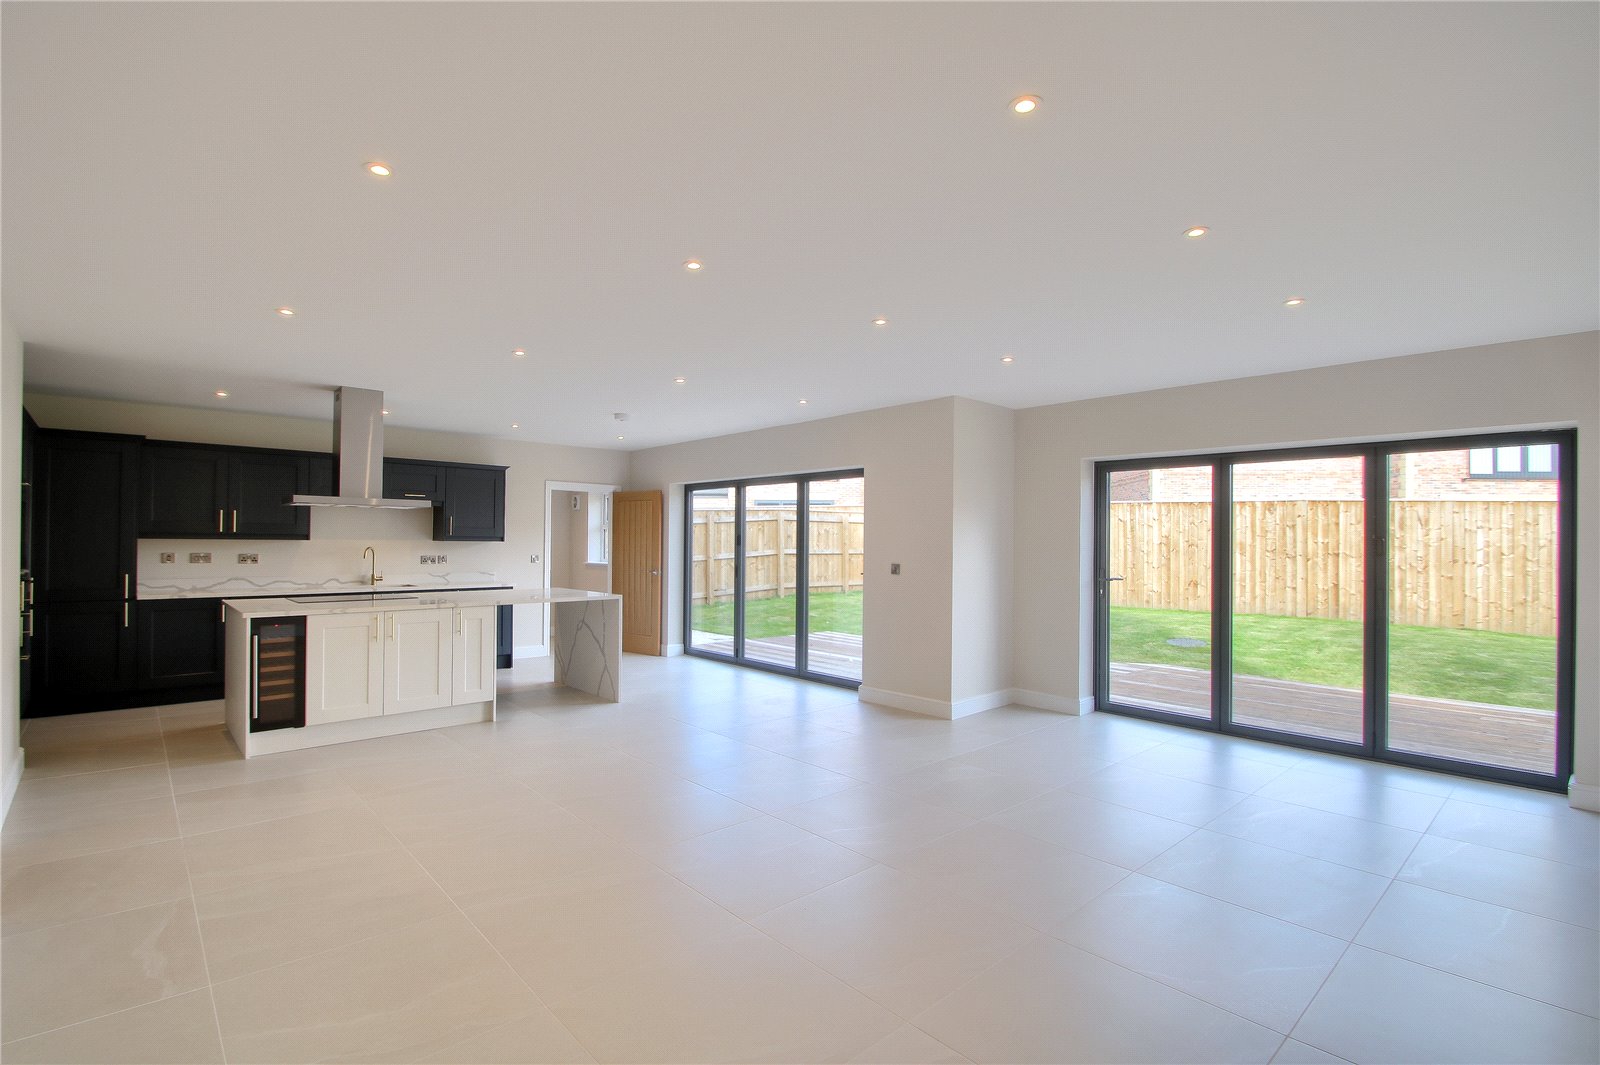 5 bed house for sale in Hunters Way, Eaglescliffe  - Property Image 2